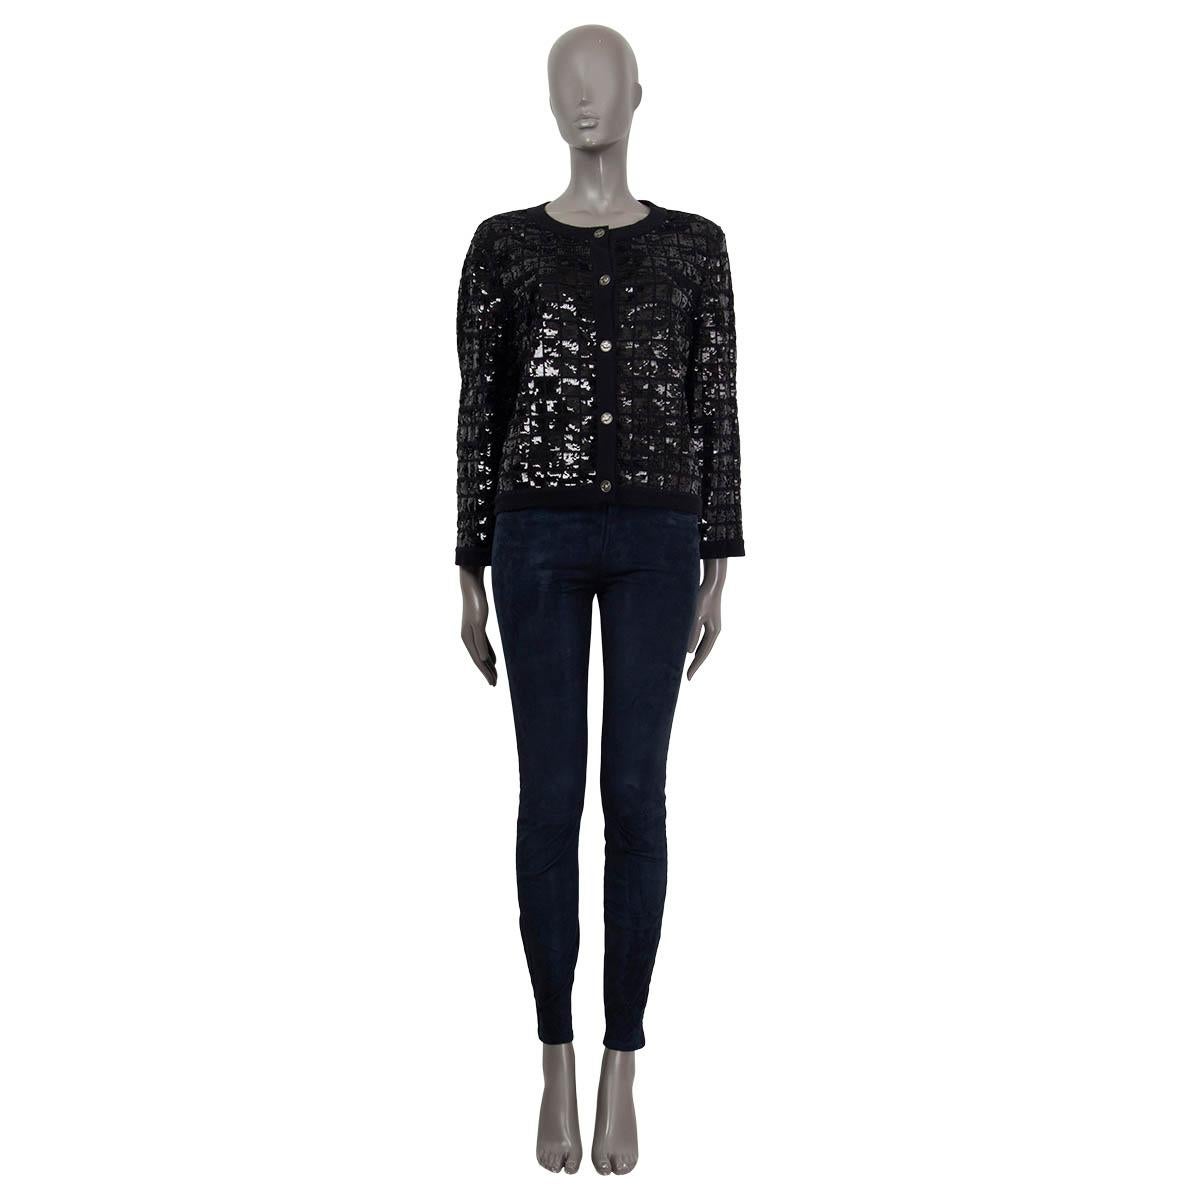 100% authentic Chanel Spring 2008 sequin embellished cardigan in black cashmere (100%). Opens with five 'CC' buttons on the front. Unlined. Has been worn and is in excellent condition.

Measurements
Tag Size	Missing Tag (M)
Size	M
Shoulder